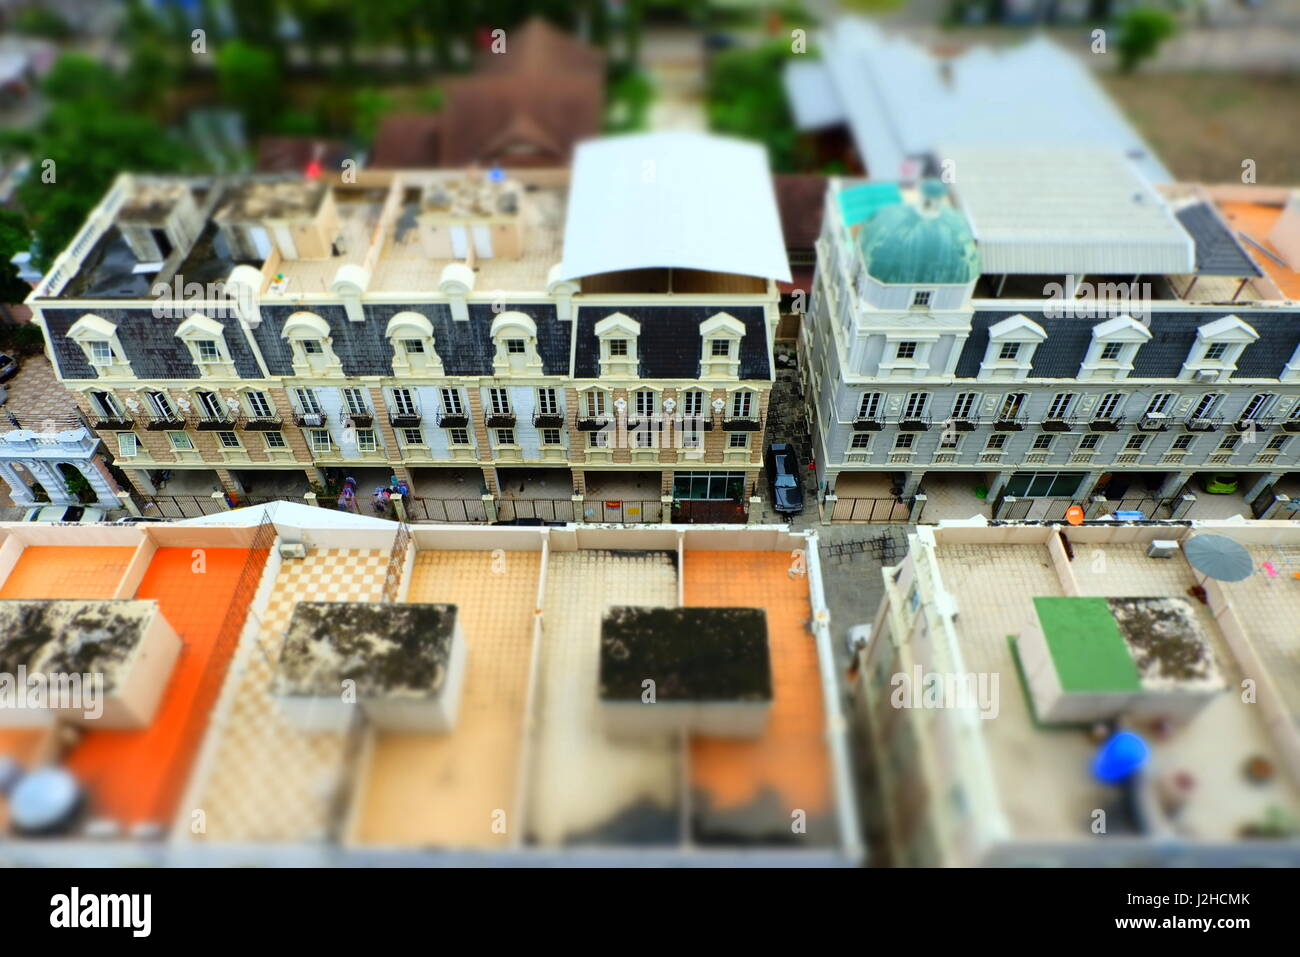 Aerial views of Old Building in Tilt Shift Effect. Stock Photo